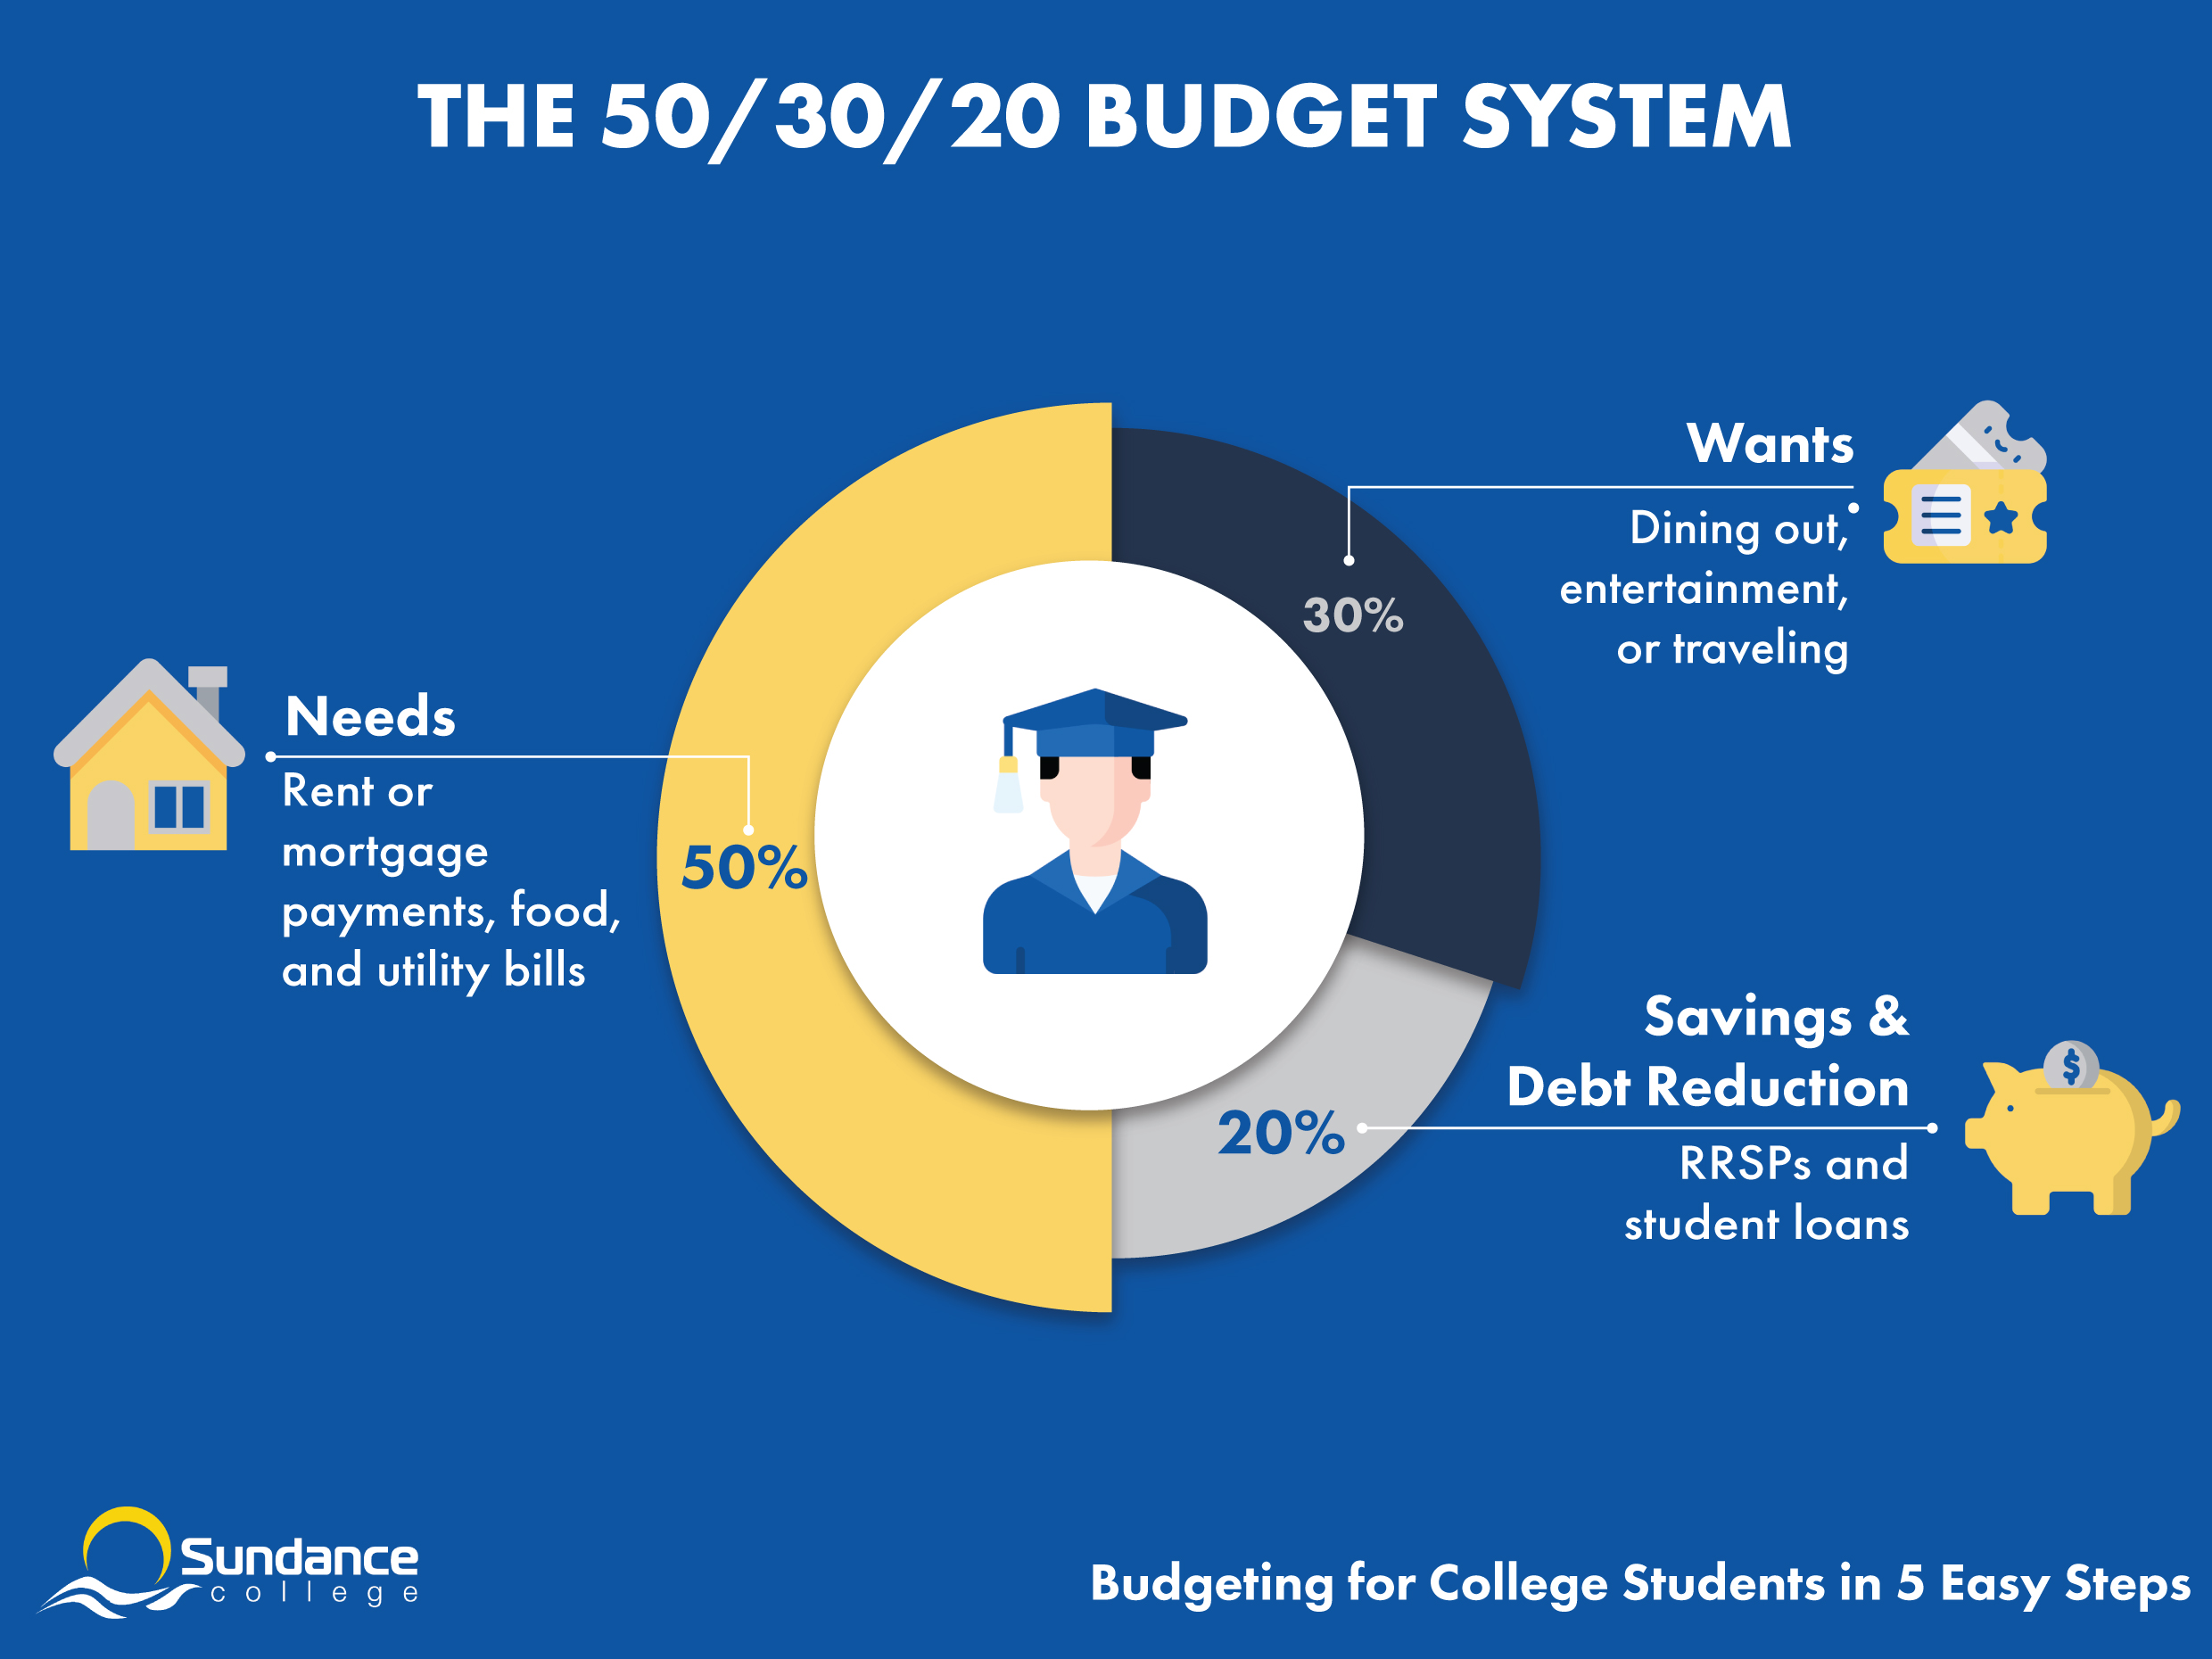 Infographic showing the 50/30/20 budget system, which allocates 50% to basic needs, 30% to nice-to-haves, and 20% to savings and debt repayment funds.